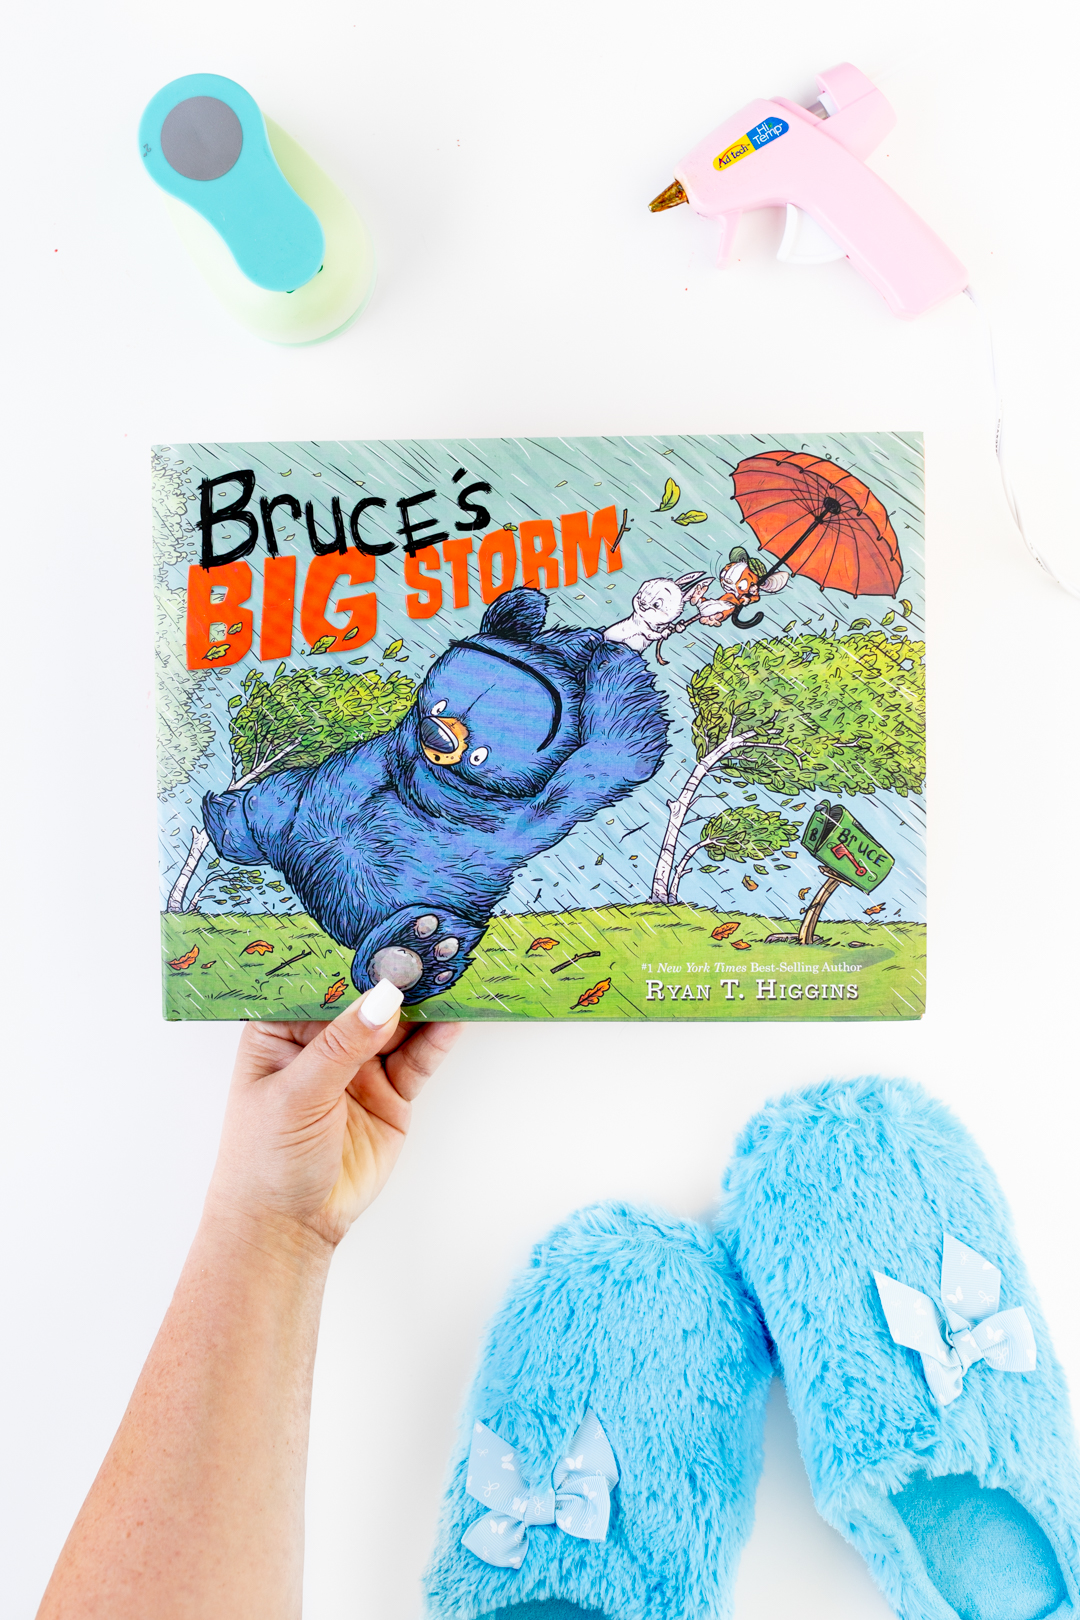 Bruce's Big Storm Book For a Cozy Day In.